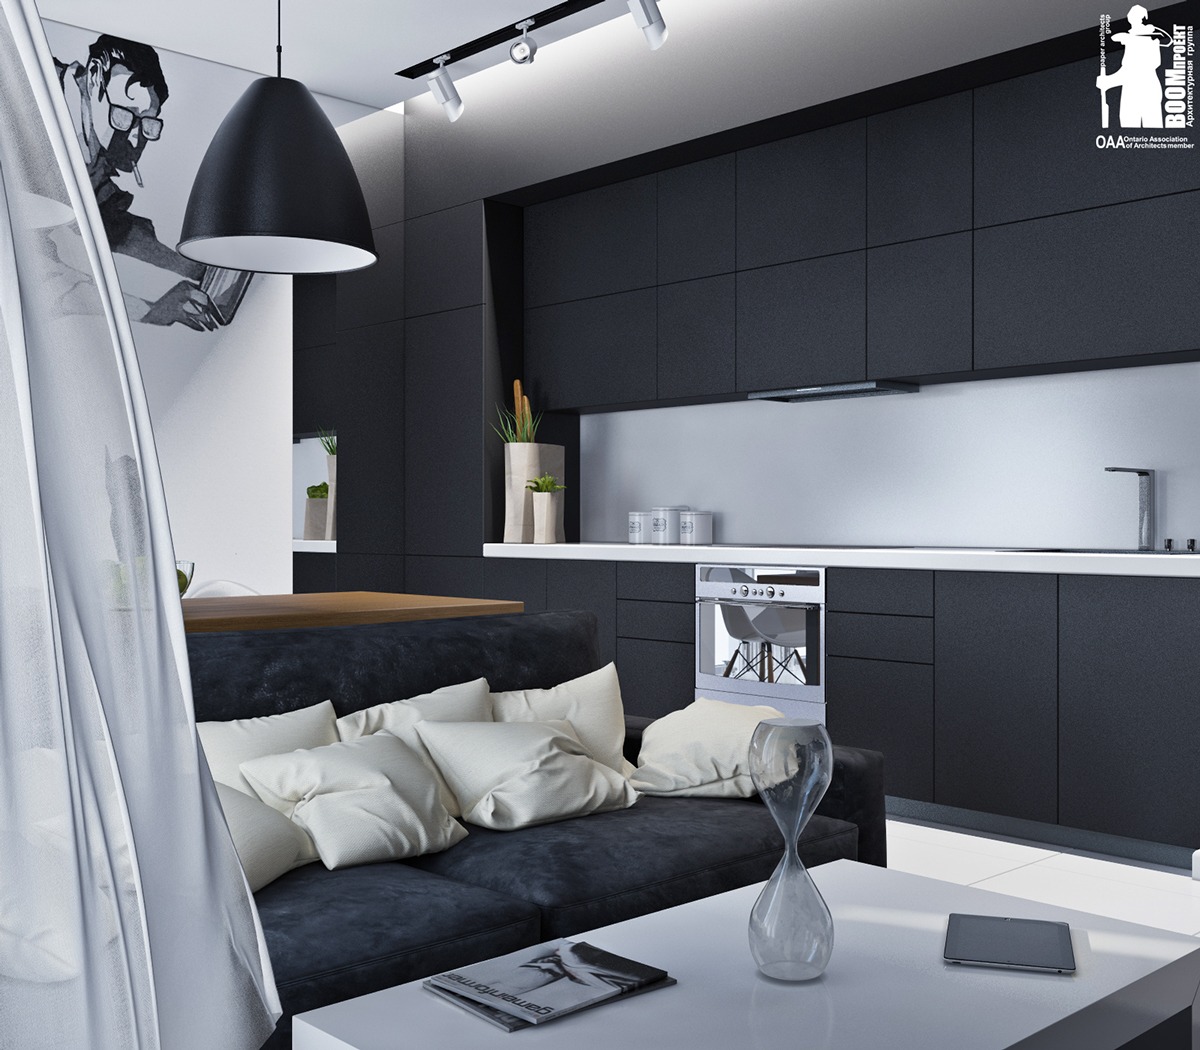 Interior design styles "width =" 1200 "height =" 1050 "srcset =" https://mileray.com/wp-content/uploads/2020/05/1588515075_670_Monochromatic-Living-Room-Colors-Idea-Combined-With-Wooden-Element.jpg 1200w, https: // myfashionos. com / wp-content / uploads / 2016/04 / artistic-monochrome-apartment-300x263.jpg 300w, https://mileray.com/wp-content/uploads/2016/04/artistic-monochrome-apartment-768x672.jpg 768w, https://mileray.com/wp-content/uploads/2016/04/artistic-monochrome-apartment-1024x896.jpg 1024w, https://mileray.com/wp-content/uploads/2016/04/artistic -monochrome-apartment-696x609.jpg 696w, https://mileray.com/wp-content/uploads/2016/04/artistic-monochrome-apartment-1068x935.jpg 1068w, https://mileray.com/wp-content /uploads/2016/04/artistic-monochrome-apartment-480x420.jpg 480w "sizes =" (maximum width: 1200px) 100vw, 1200px